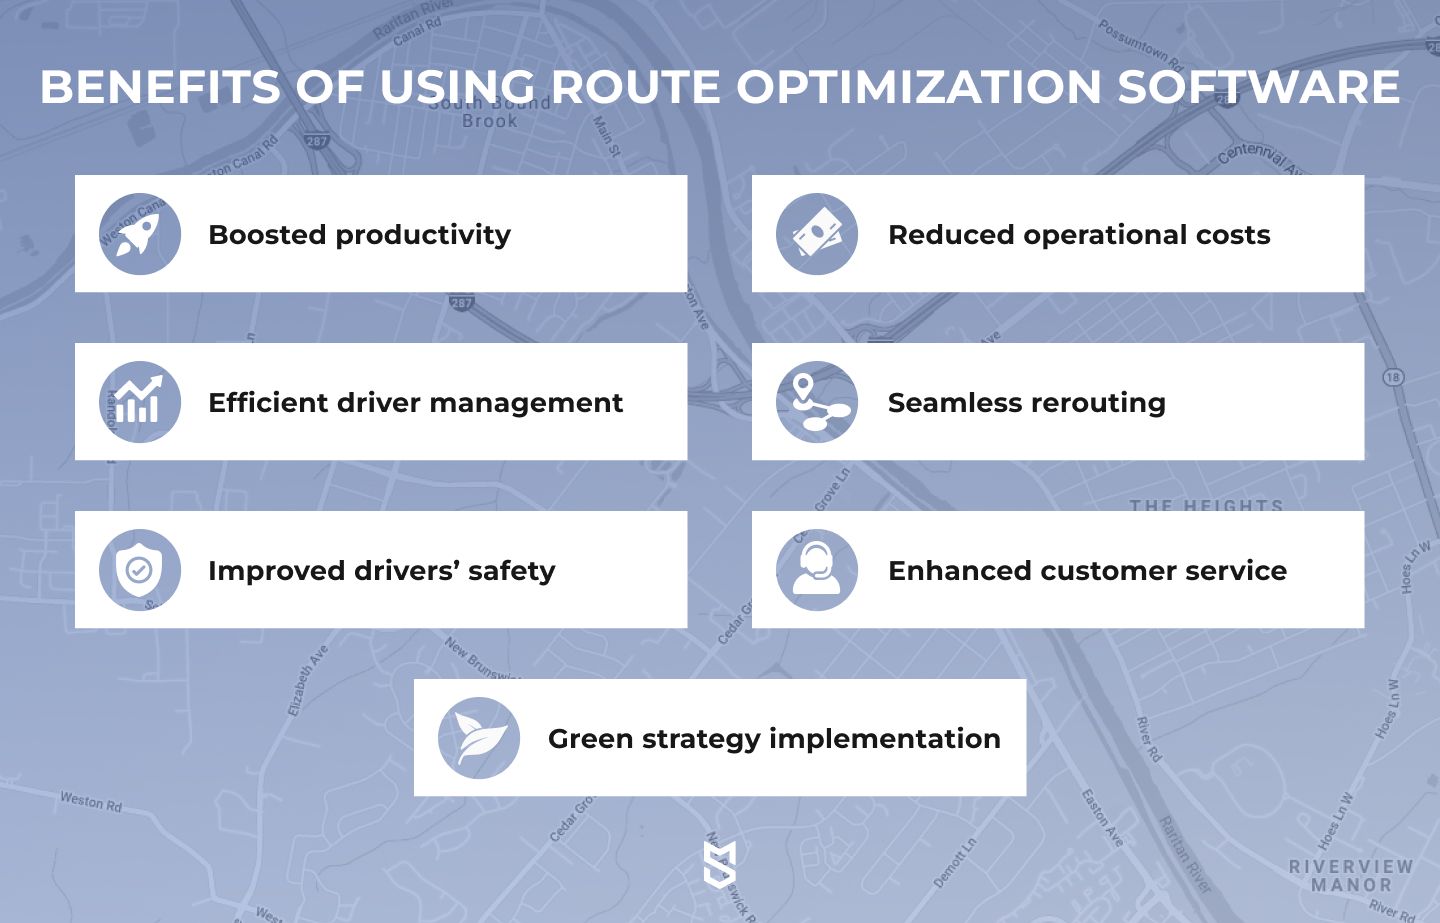 Benefits of using route optimization software